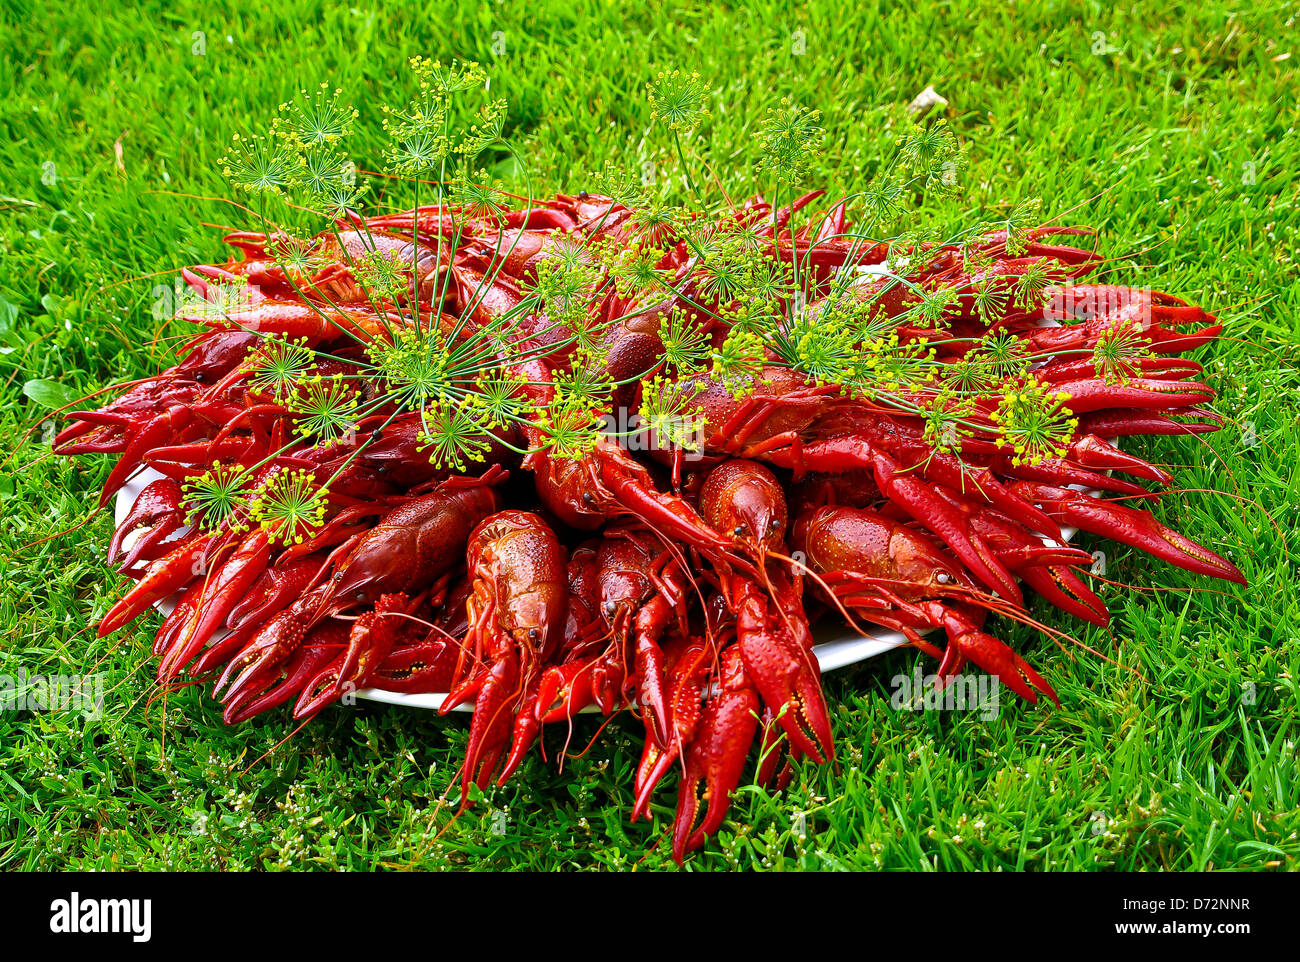 Cooked crayfish wih dill on plate placed on grass Stock Photo